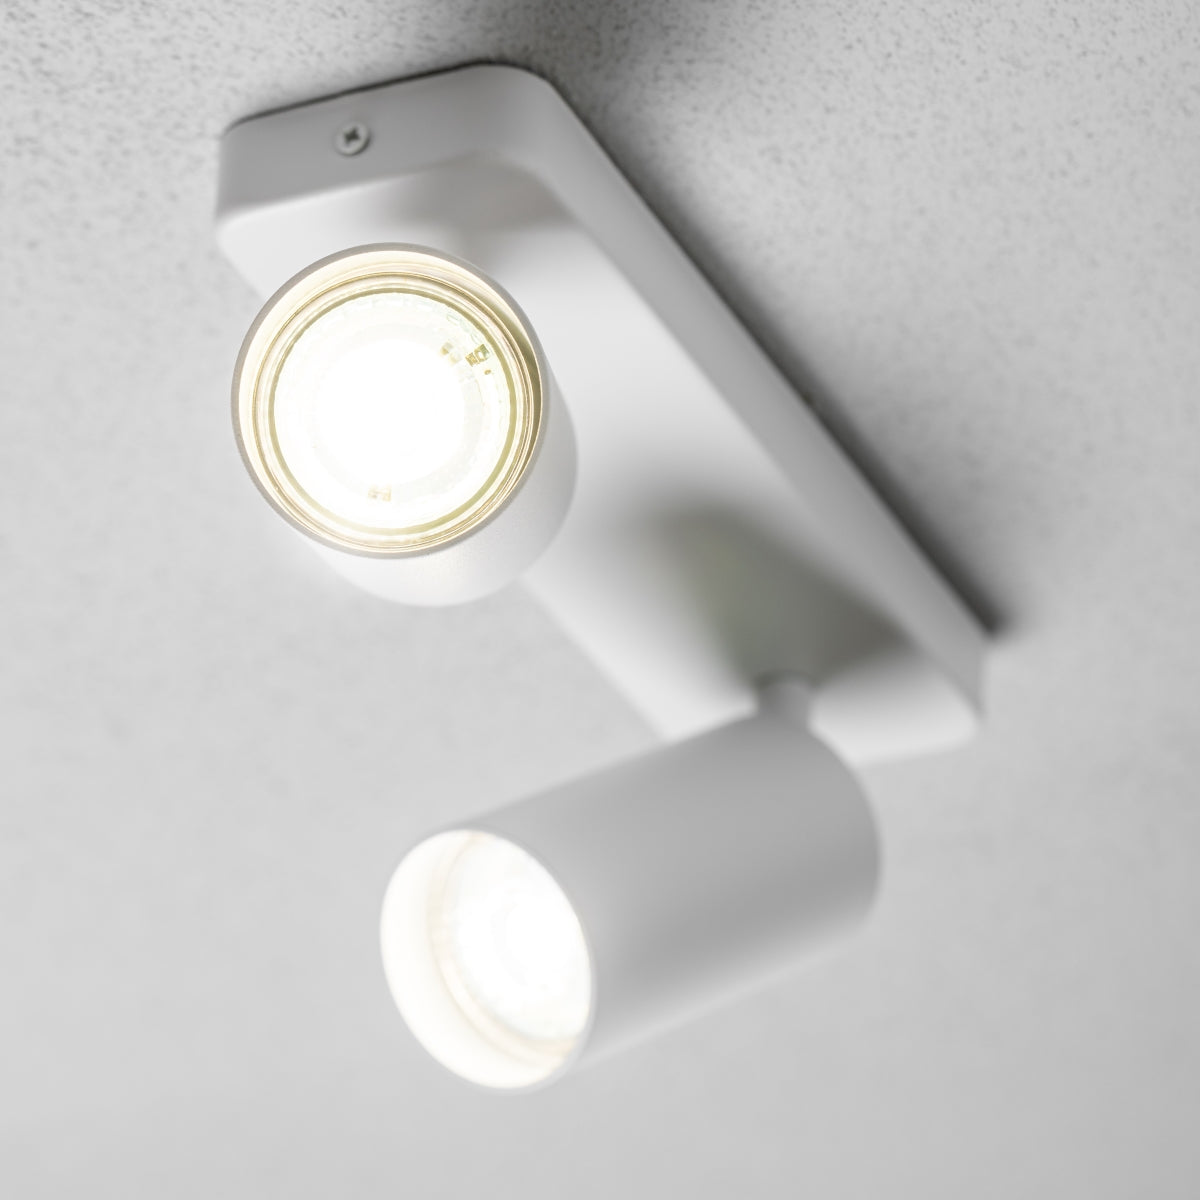 The white Nell lamp consists of two cylindrical spotlights, both of which can be tilted and adjusted on their own axis. The spotlights are attached to a rectangular bracket, which makes them equally suitable for mounting on walls and ceilings. Made of an aluminium body and powder coated white, the lamp with its simple design fits well into different spaces. Whether functional office or cosy home